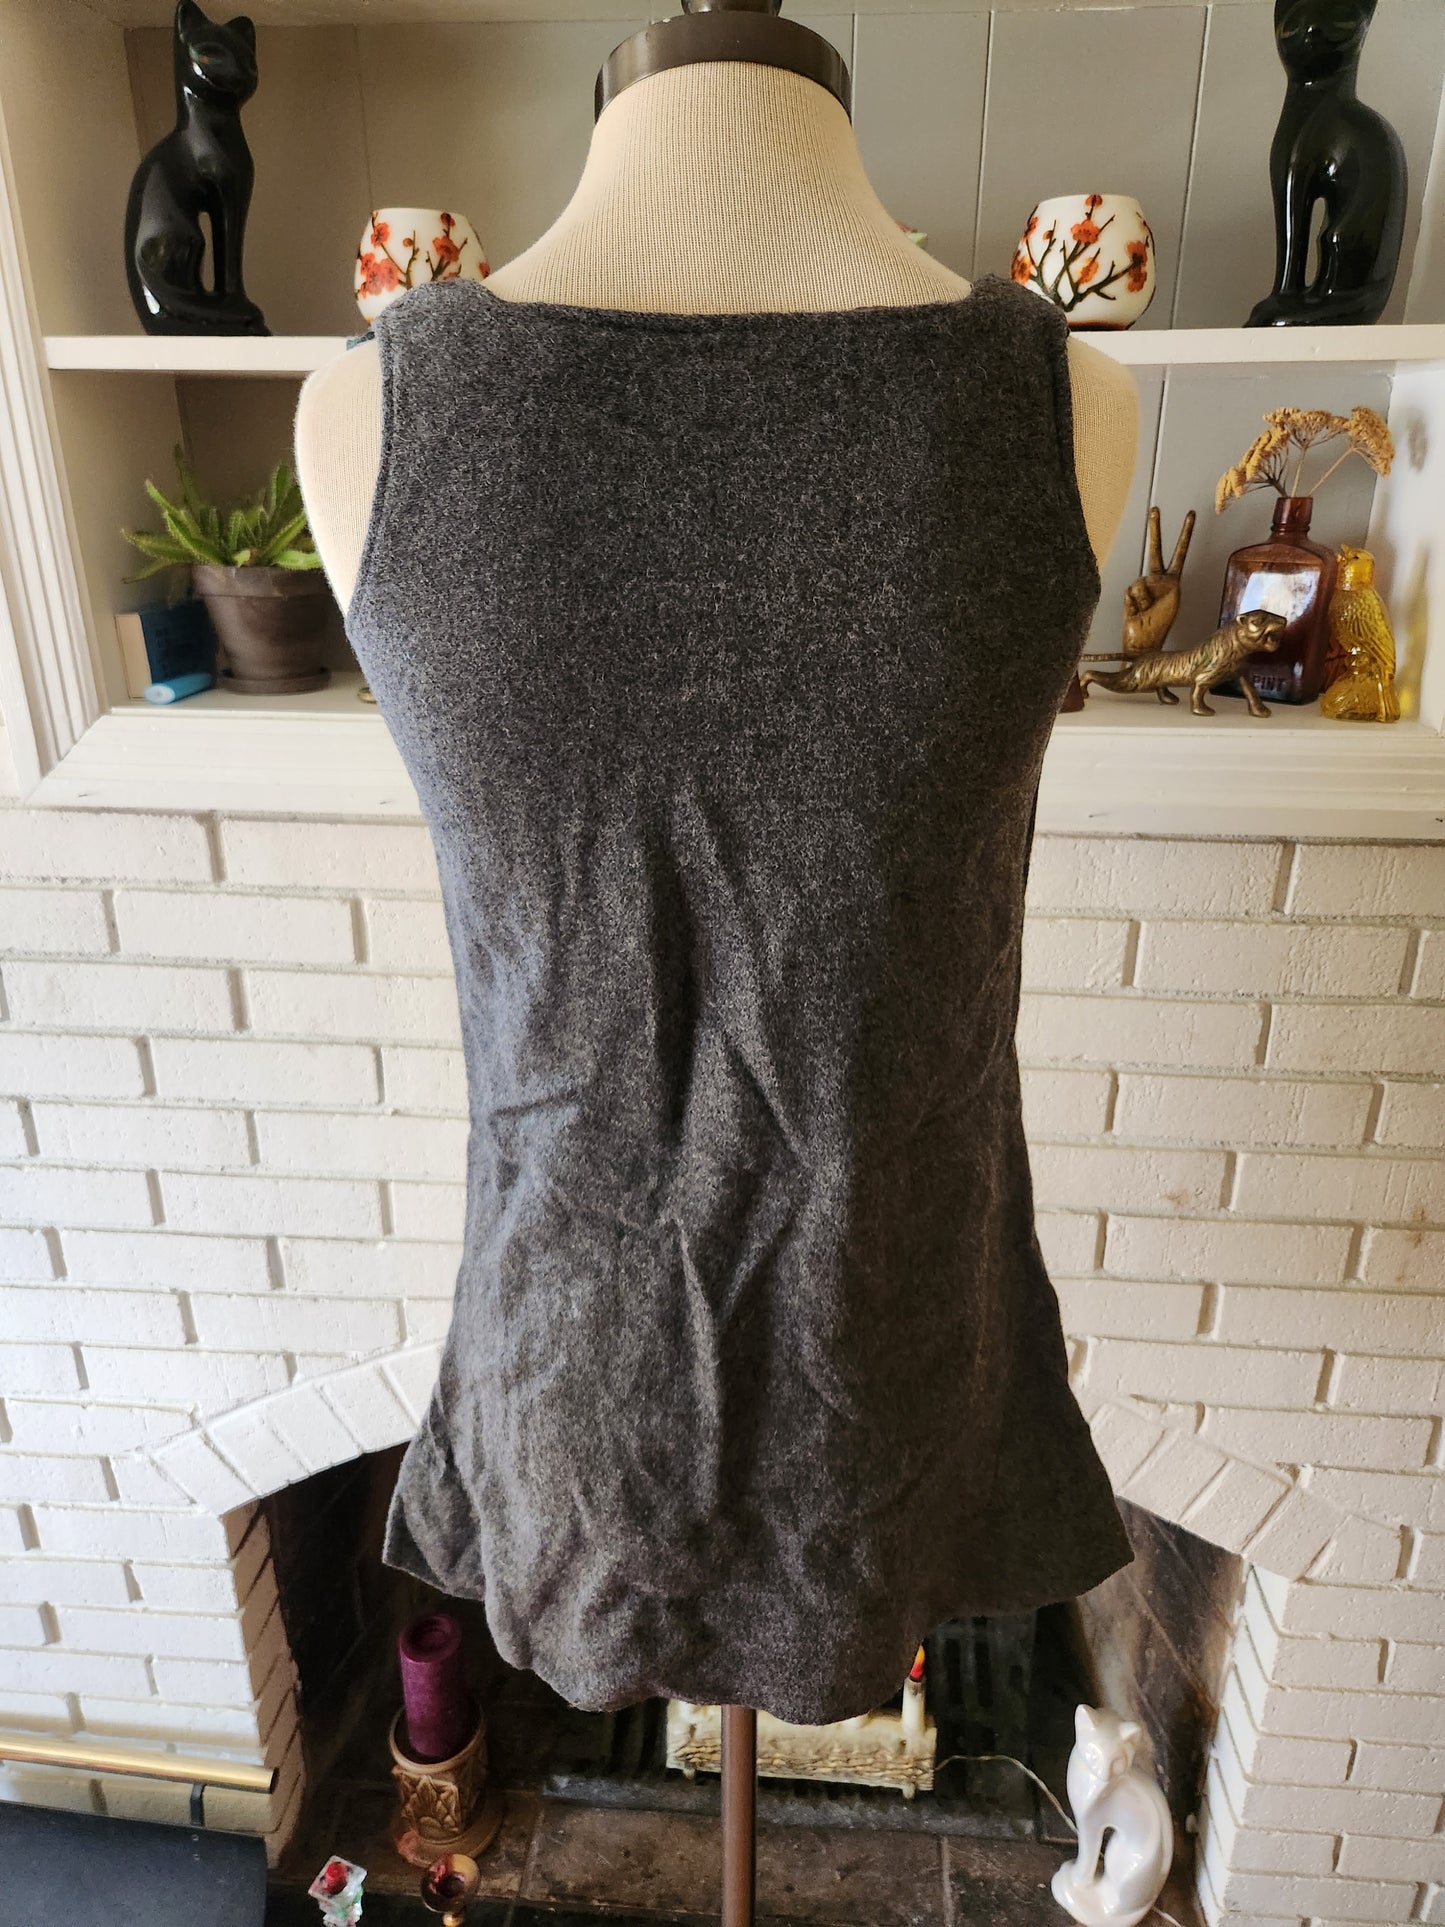 Vintage Sleeveless Gray Dress by Charlie's Girls for Cheetah